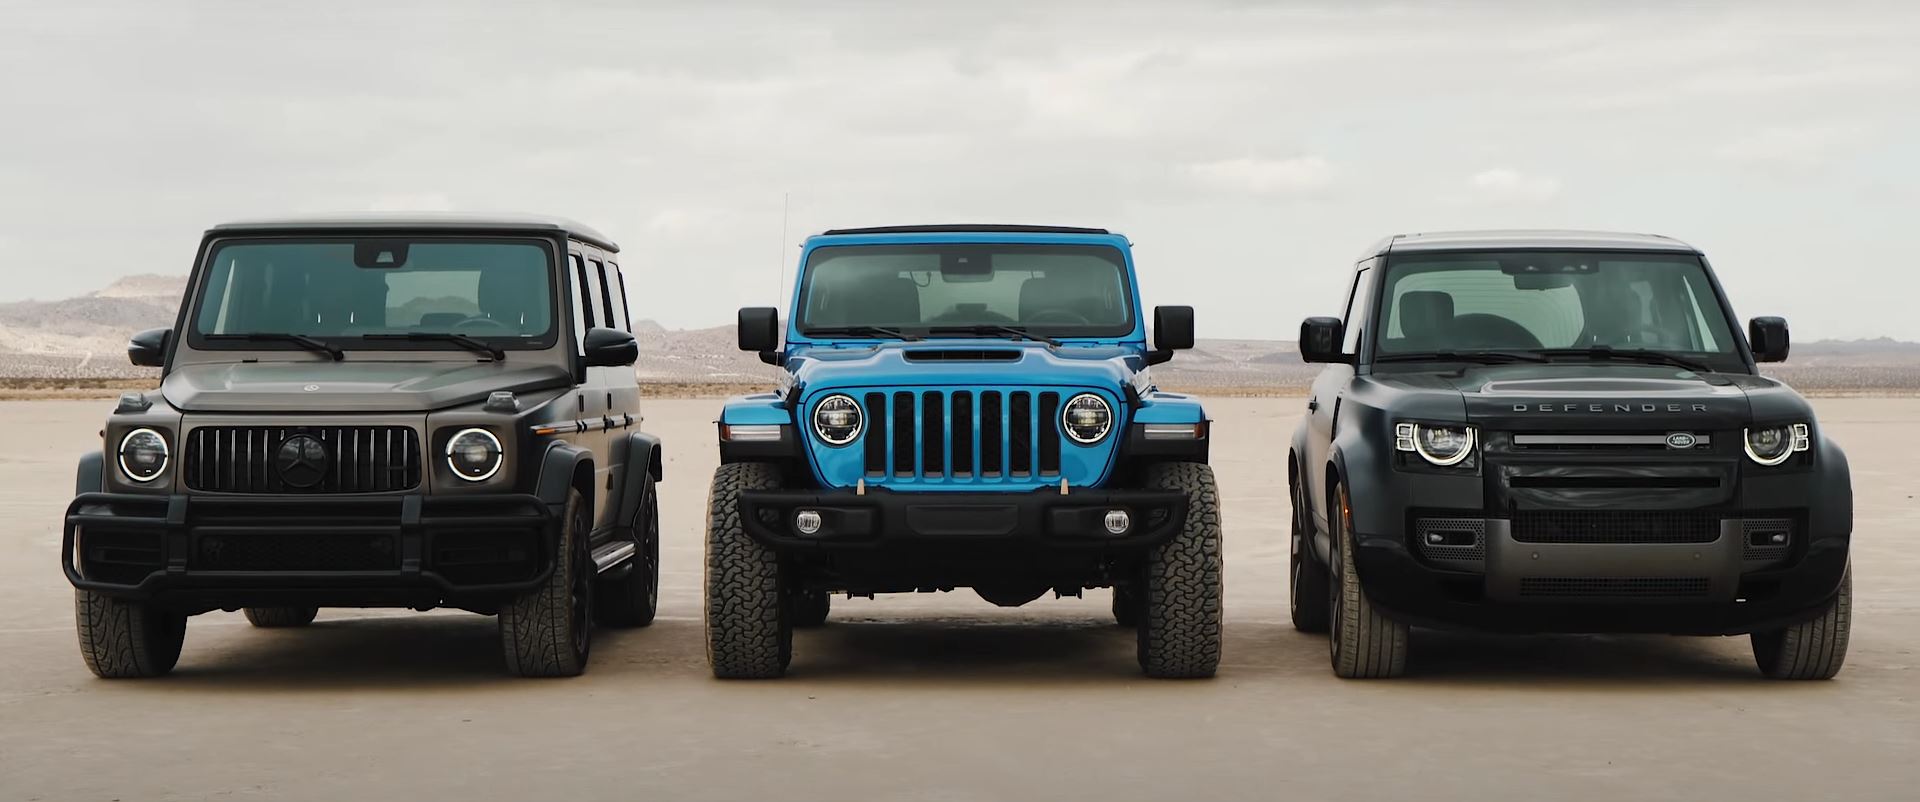 Jeep Wrangler 392 Boldly Races Euro Rivals, Eats Dust for Lunch and Dinner  - autoevolution